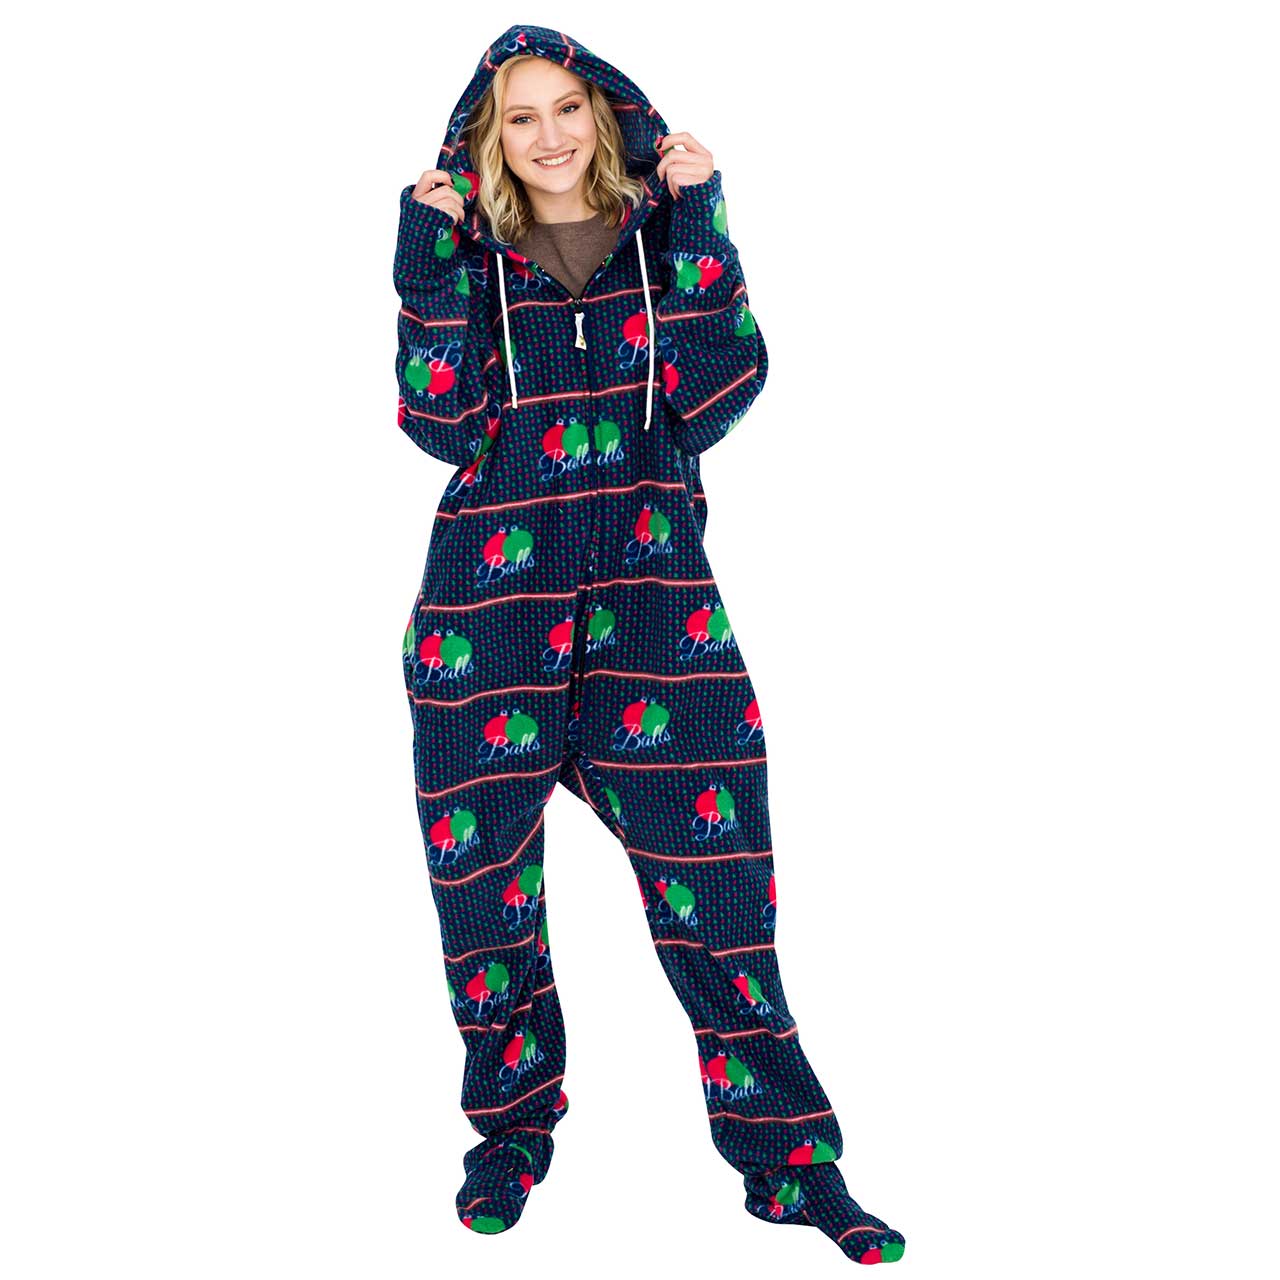 Balls Ugly Christmas Lazy Black Pajama Suit with Hood,New Products : uglyschristmassweater.com